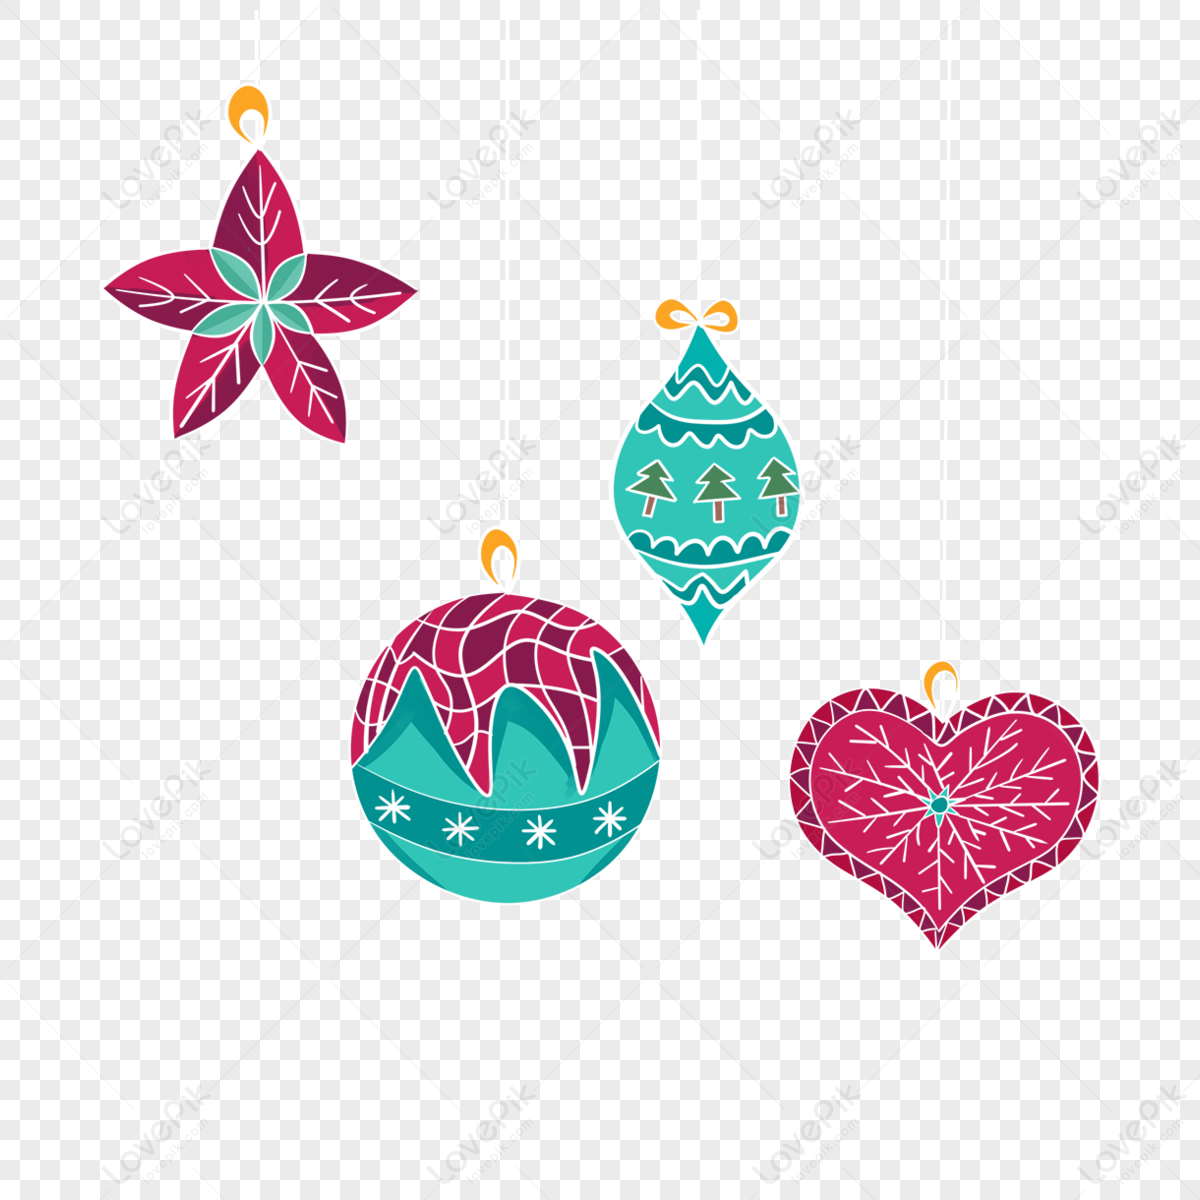 Flat Ornament PNG Images With Transparent Background